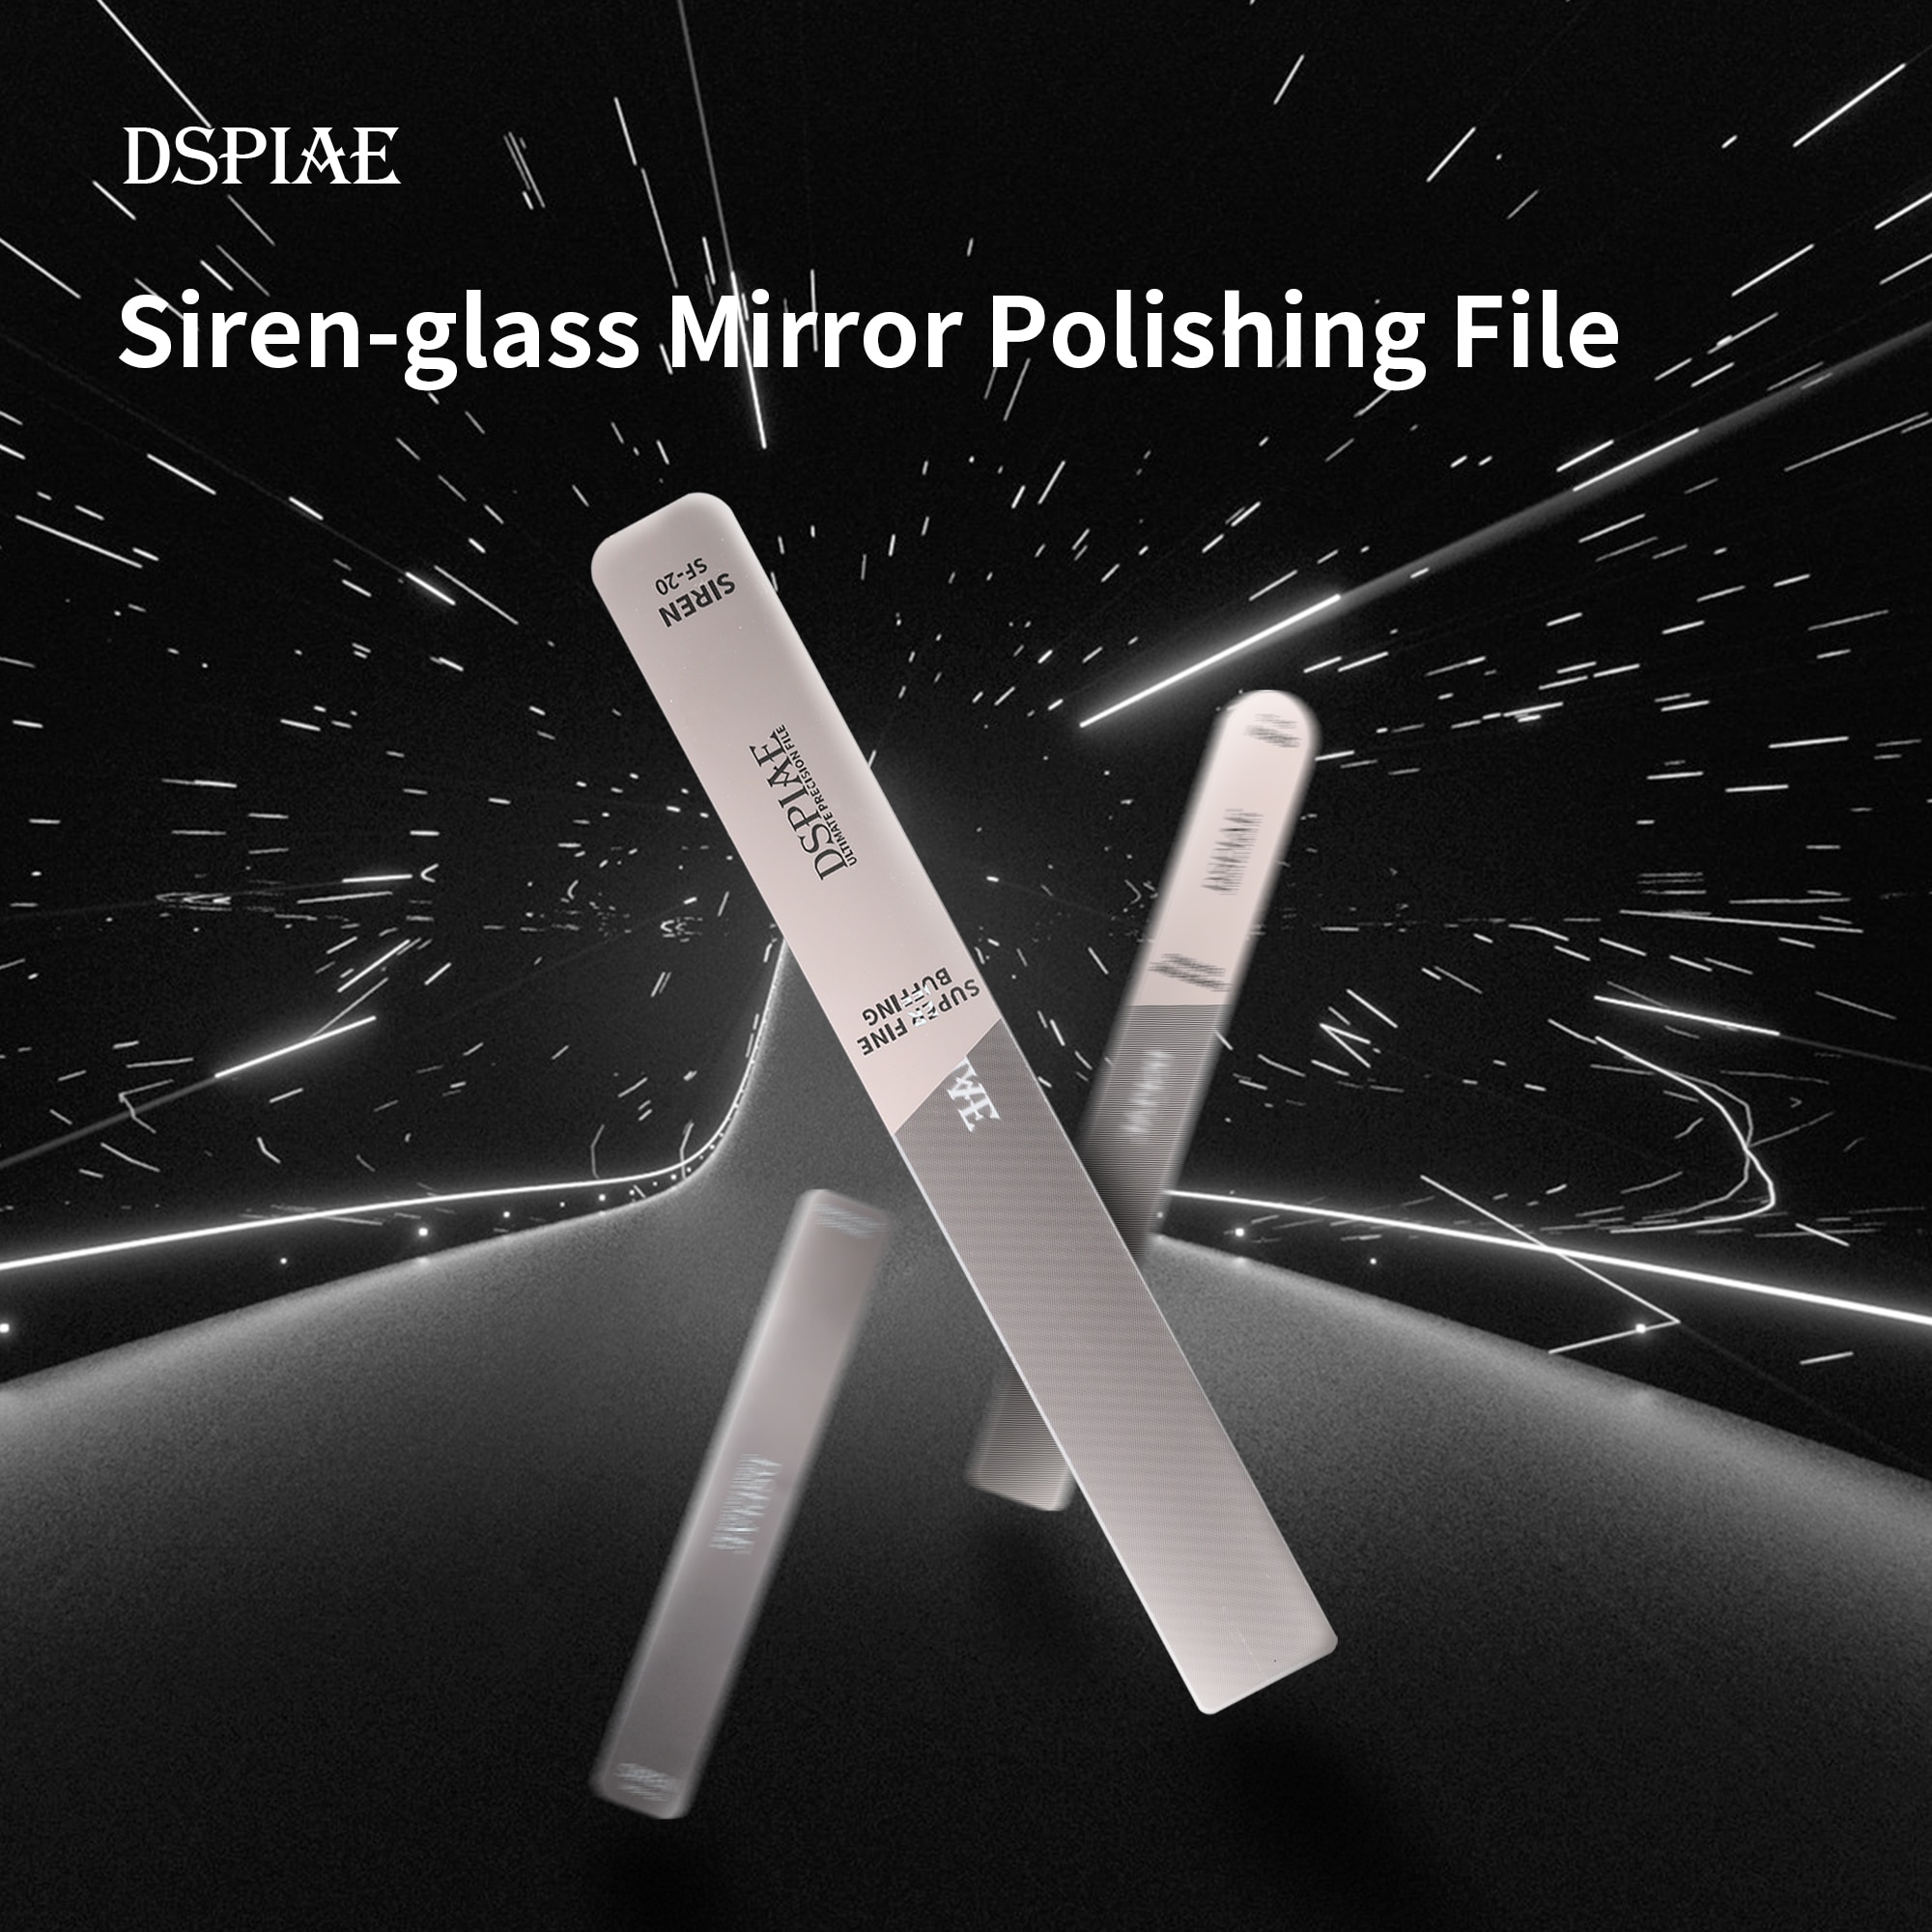 DSPIAE SF-20/SF-15/SF-16/SF-17/MSF-13 Siren Ultimate Precision File Model Assembly Tool Hobby Accessory